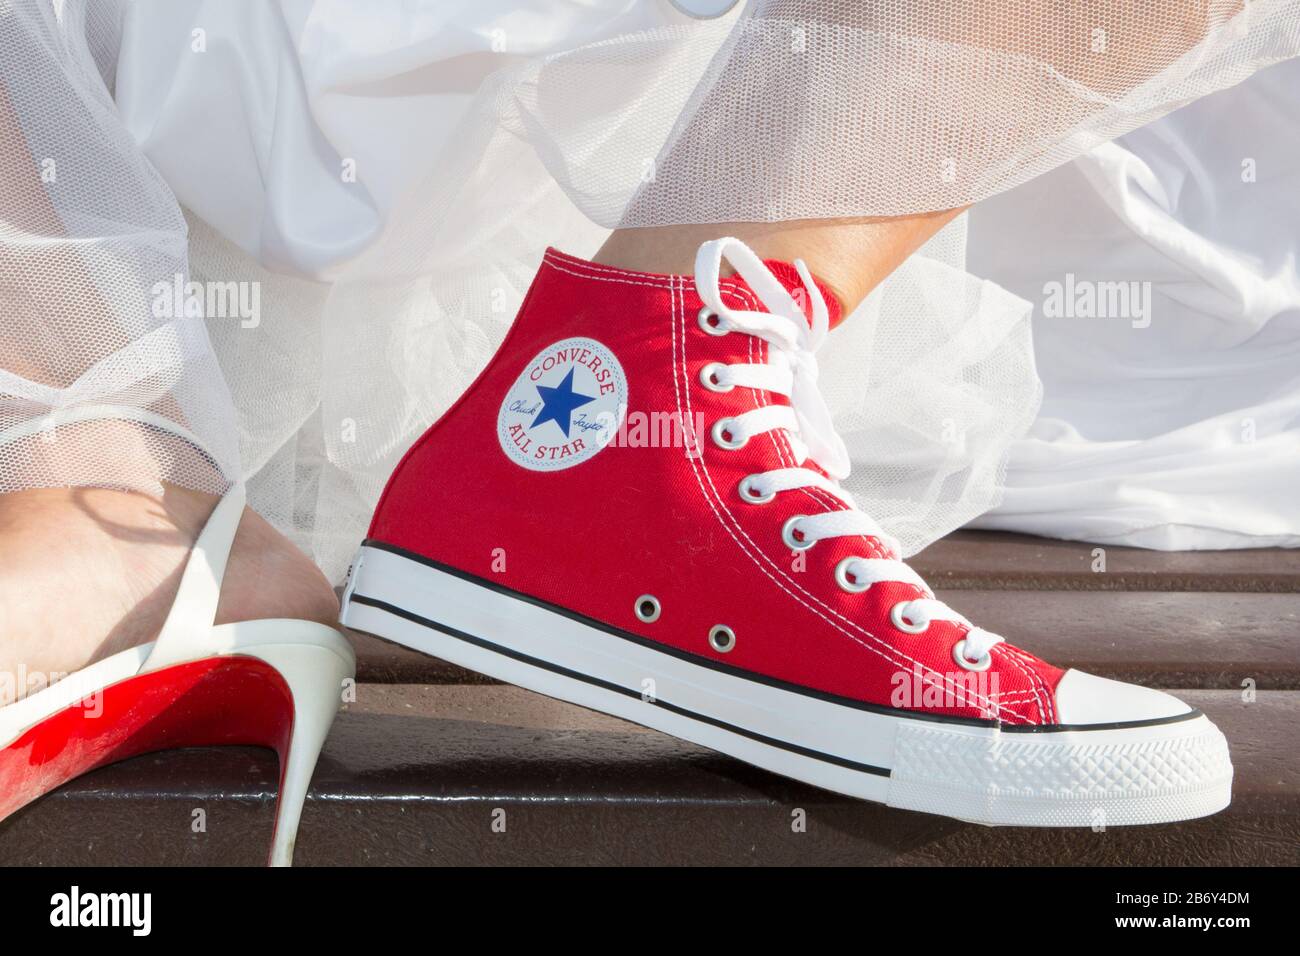 Bordeaux , Aquitaine / France - 11 07 2019 : Bride feet Wedding Dress and  red Sneakers converse all star chuck taylor Stock Photo - Alamy